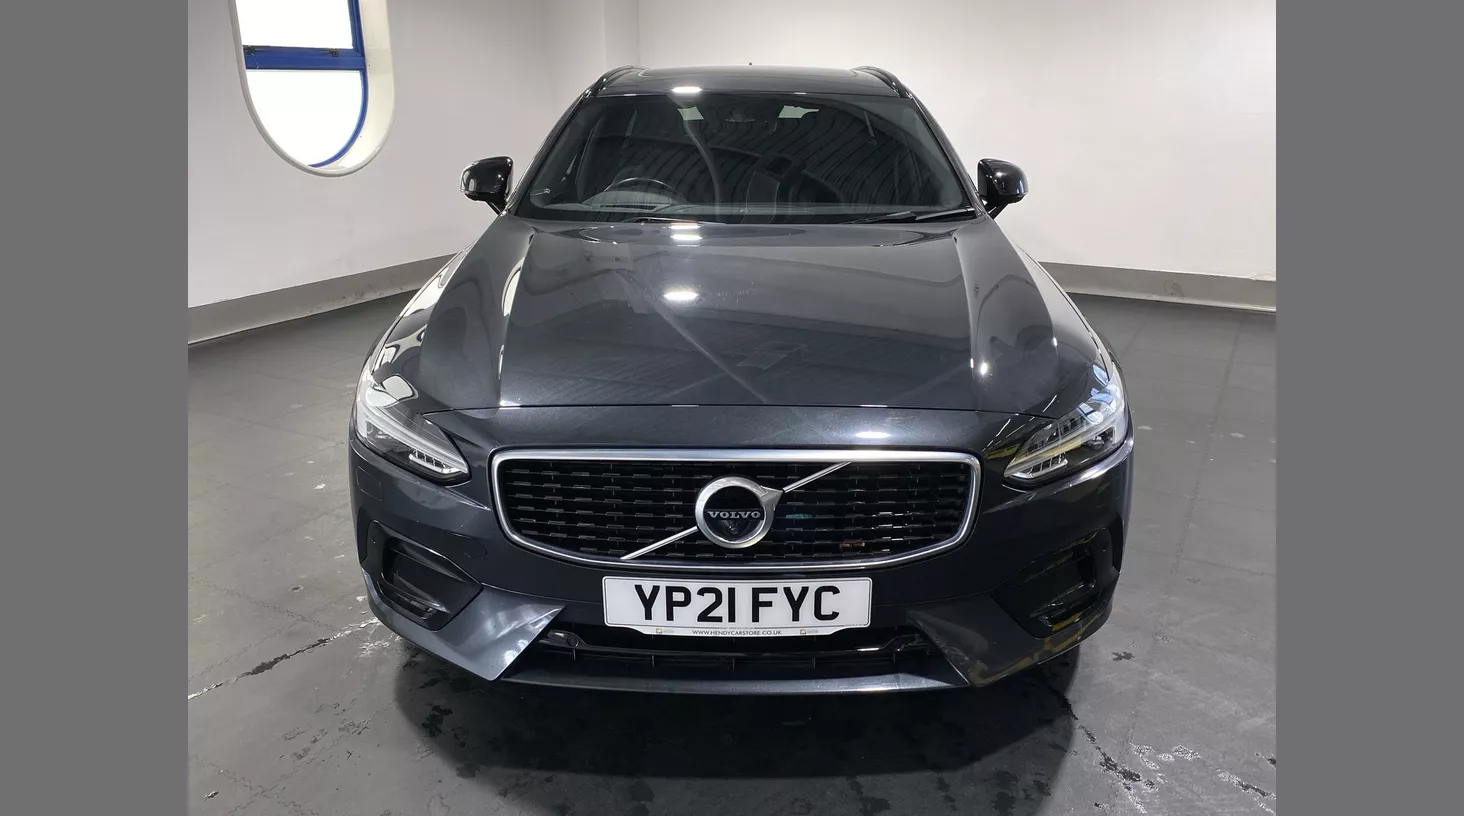 Volvo V90 2.0 T6 [310] R DESIGN Plus 5dr AWD Geartronic